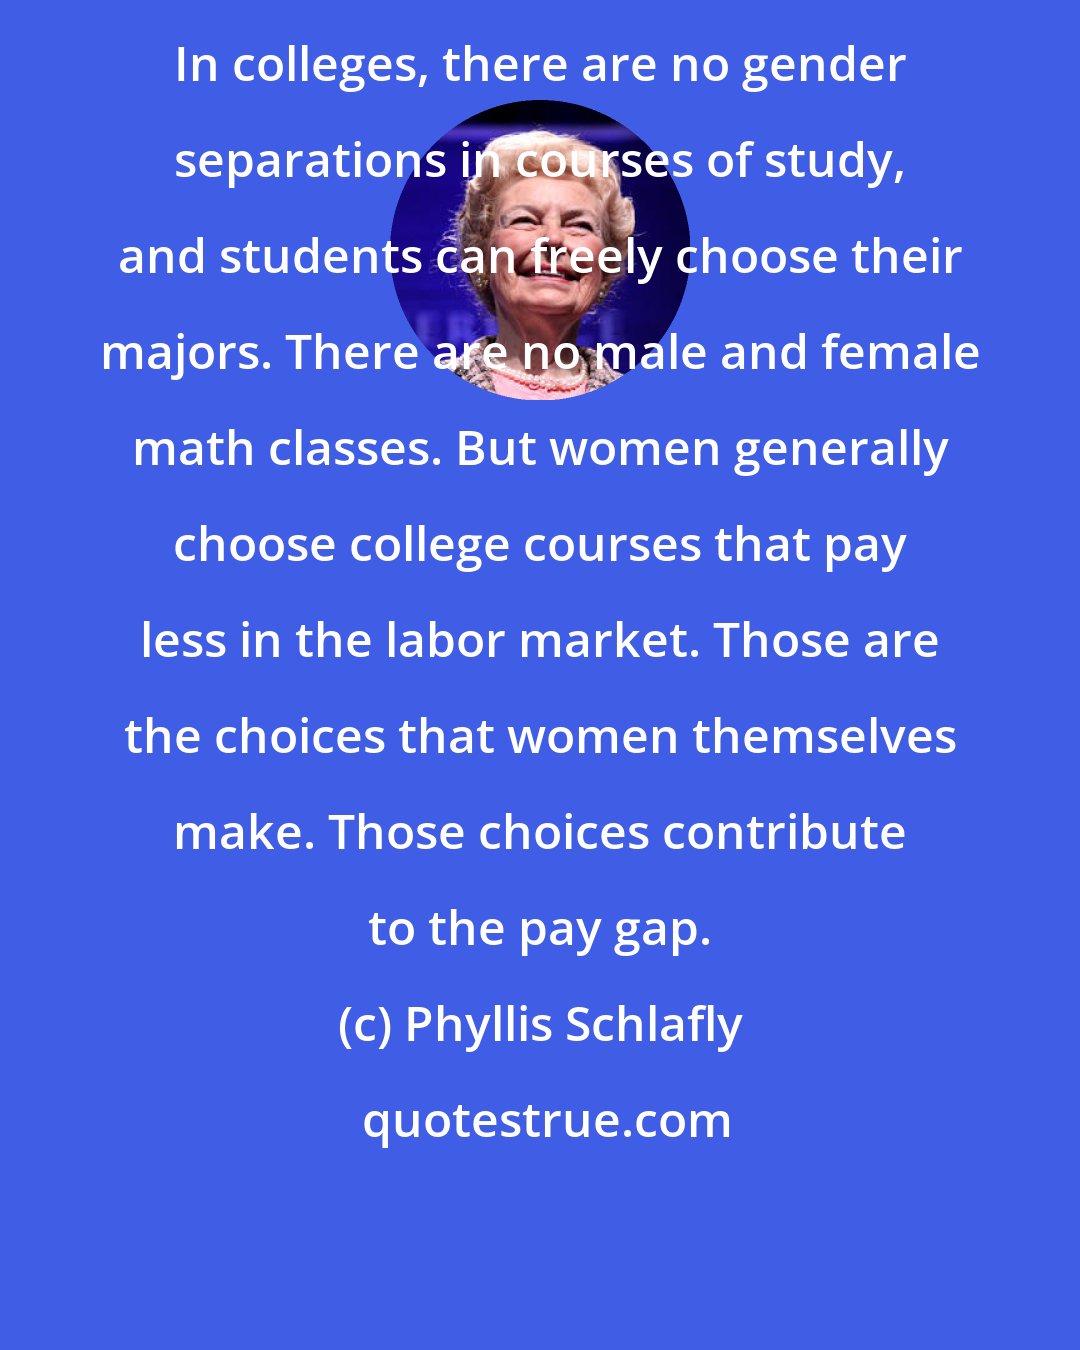 Phyllis Schlafly: In colleges, there are no gender separations in courses of study, and students can freely choose their majors. There are no male and female math classes. But women generally choose college courses that pay less in the labor market. Those are the choices that women themselves make. Those choices contribute to the pay gap.